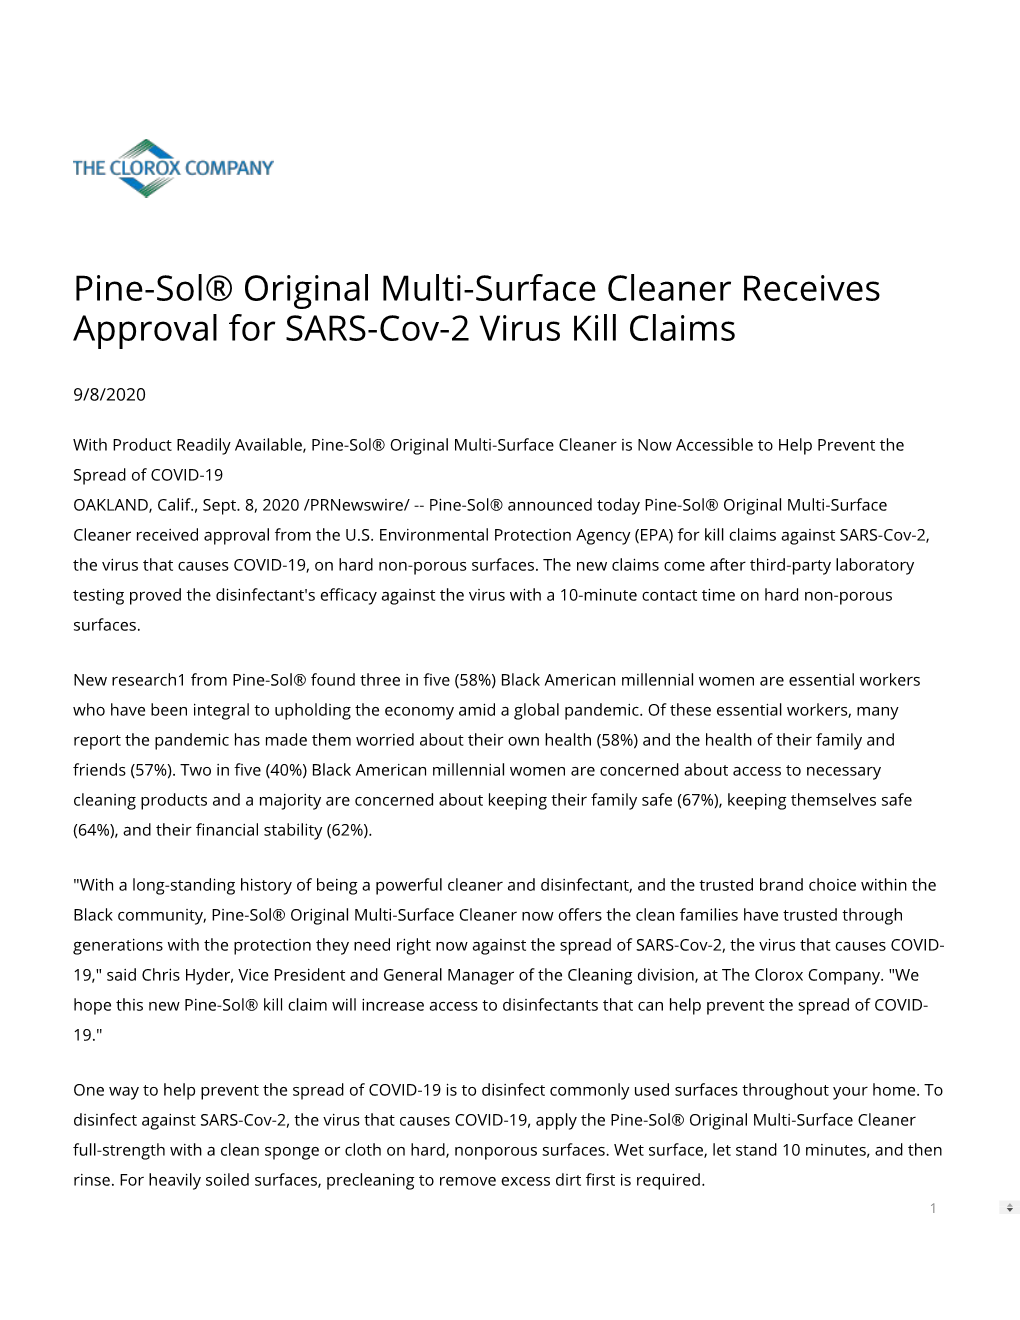 Pine-Sol® Original Multi-Surface Cleaner Receives Approval for SARS-Cov-2 Virus Kill Claims